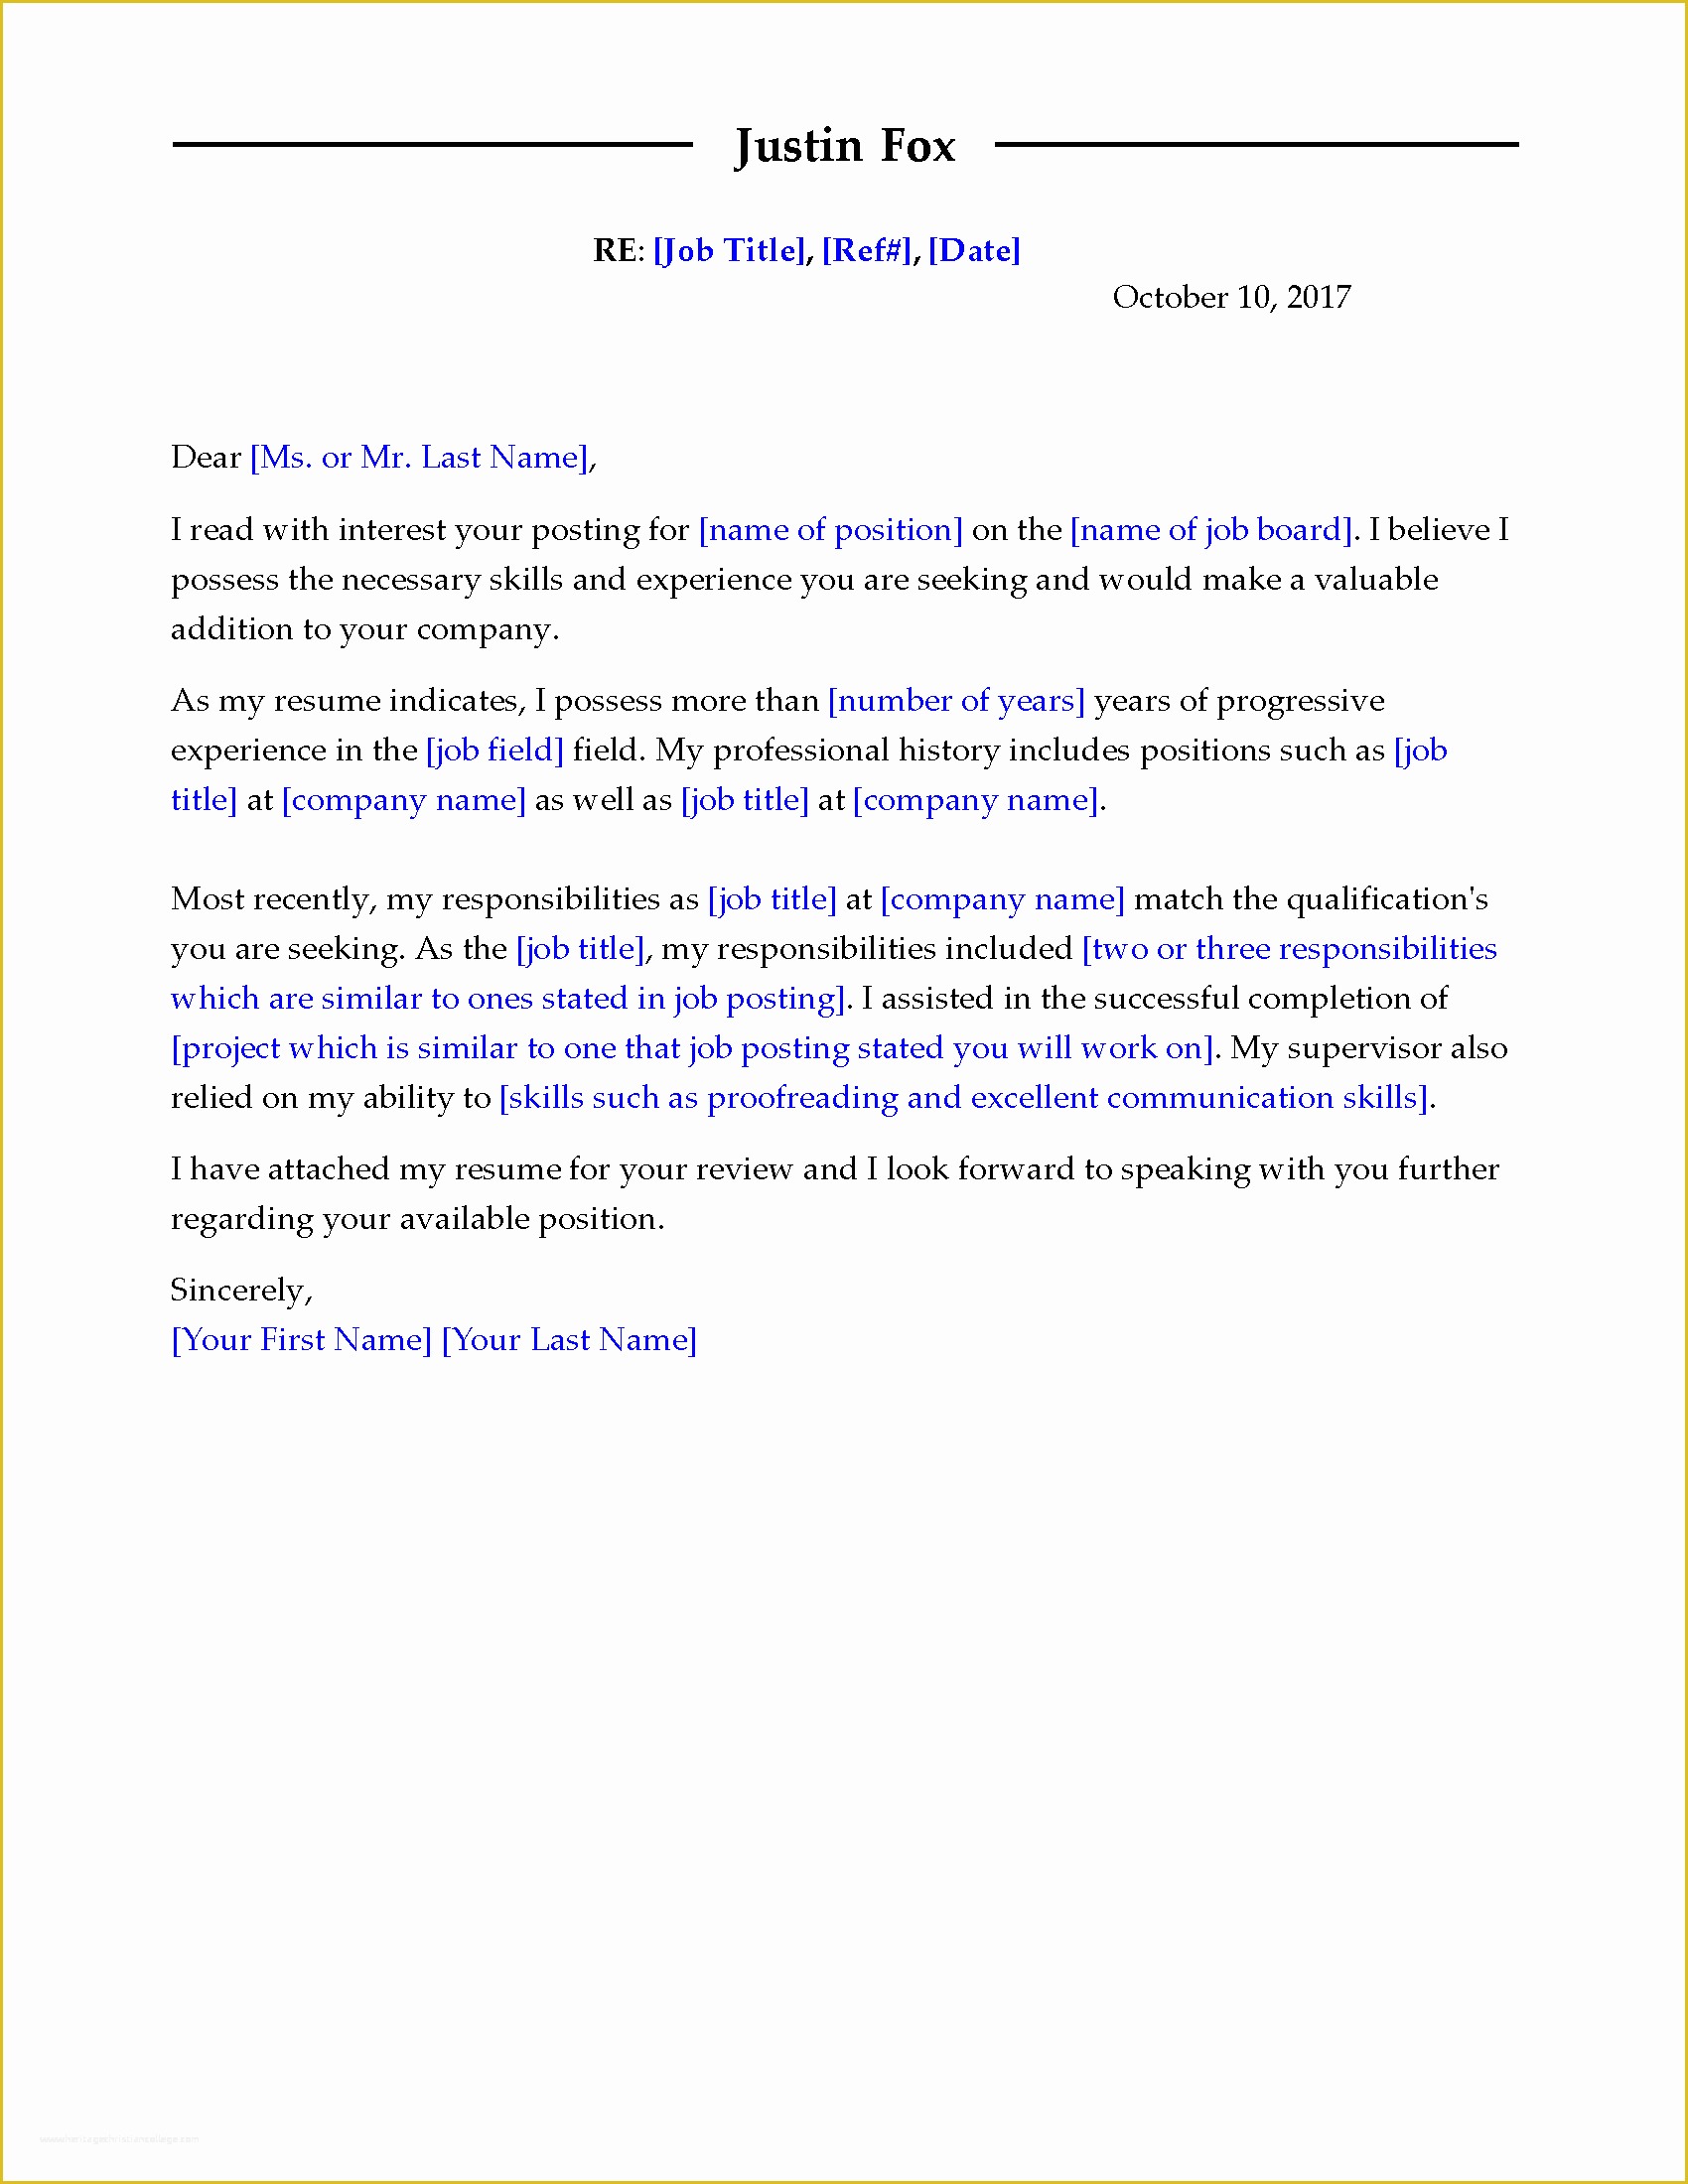 Free Modern Cover Letter Template Of Get the Job with Free Professional Cover Letter Templates